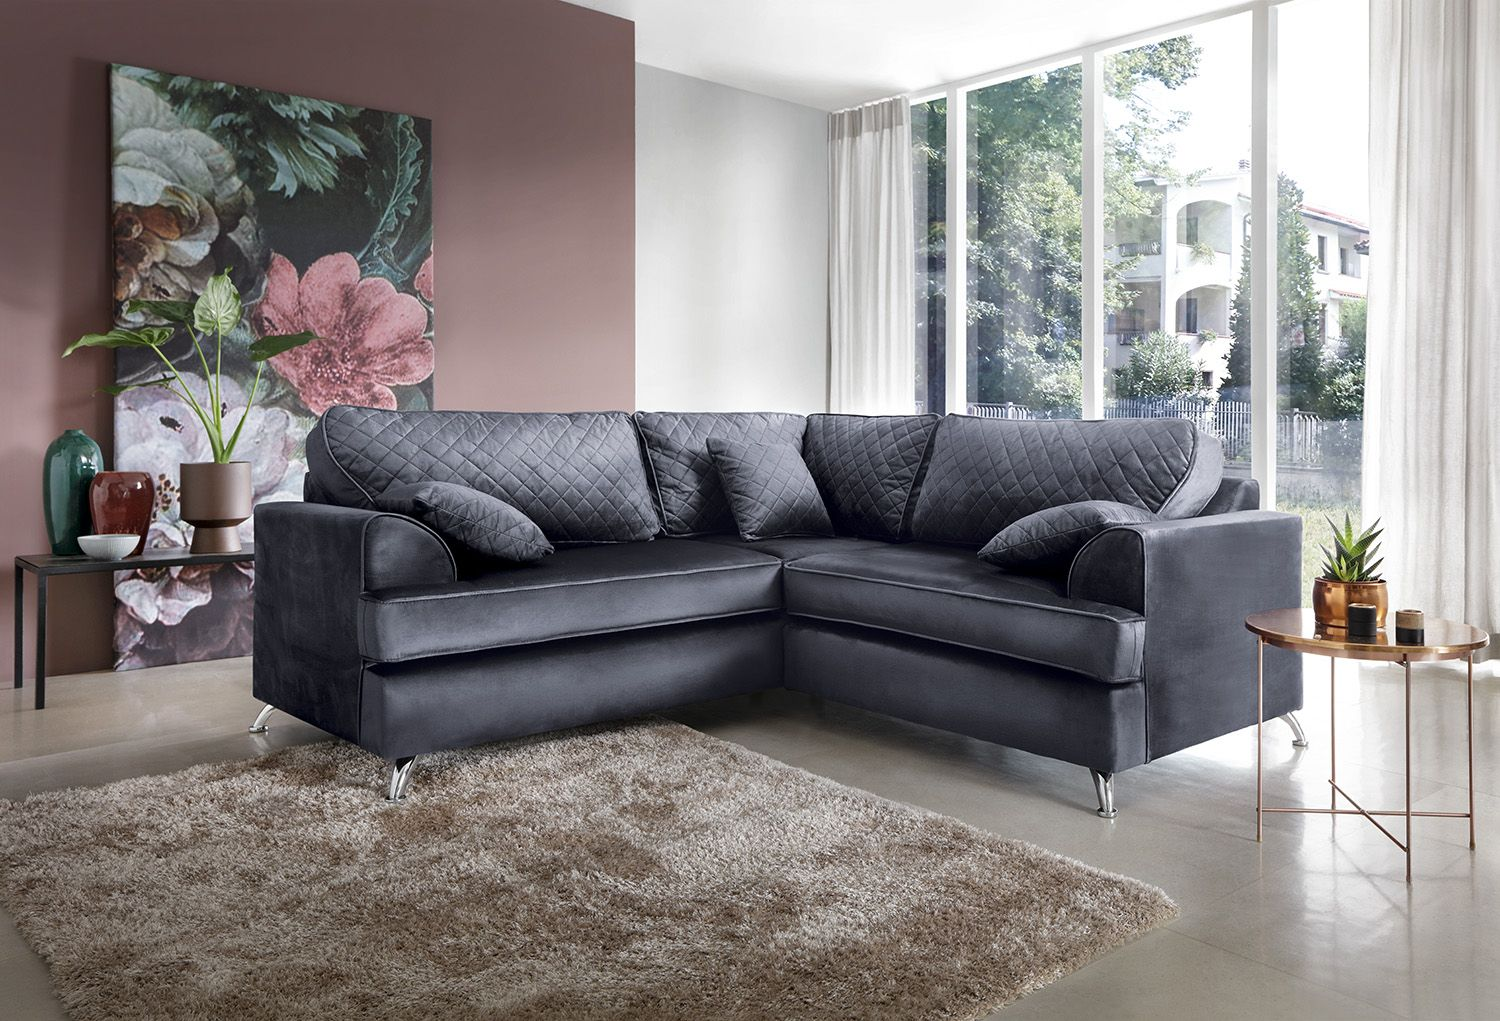 What Curtains For Sofa Colour, What Colour Curtains Go With A Grey Living Room